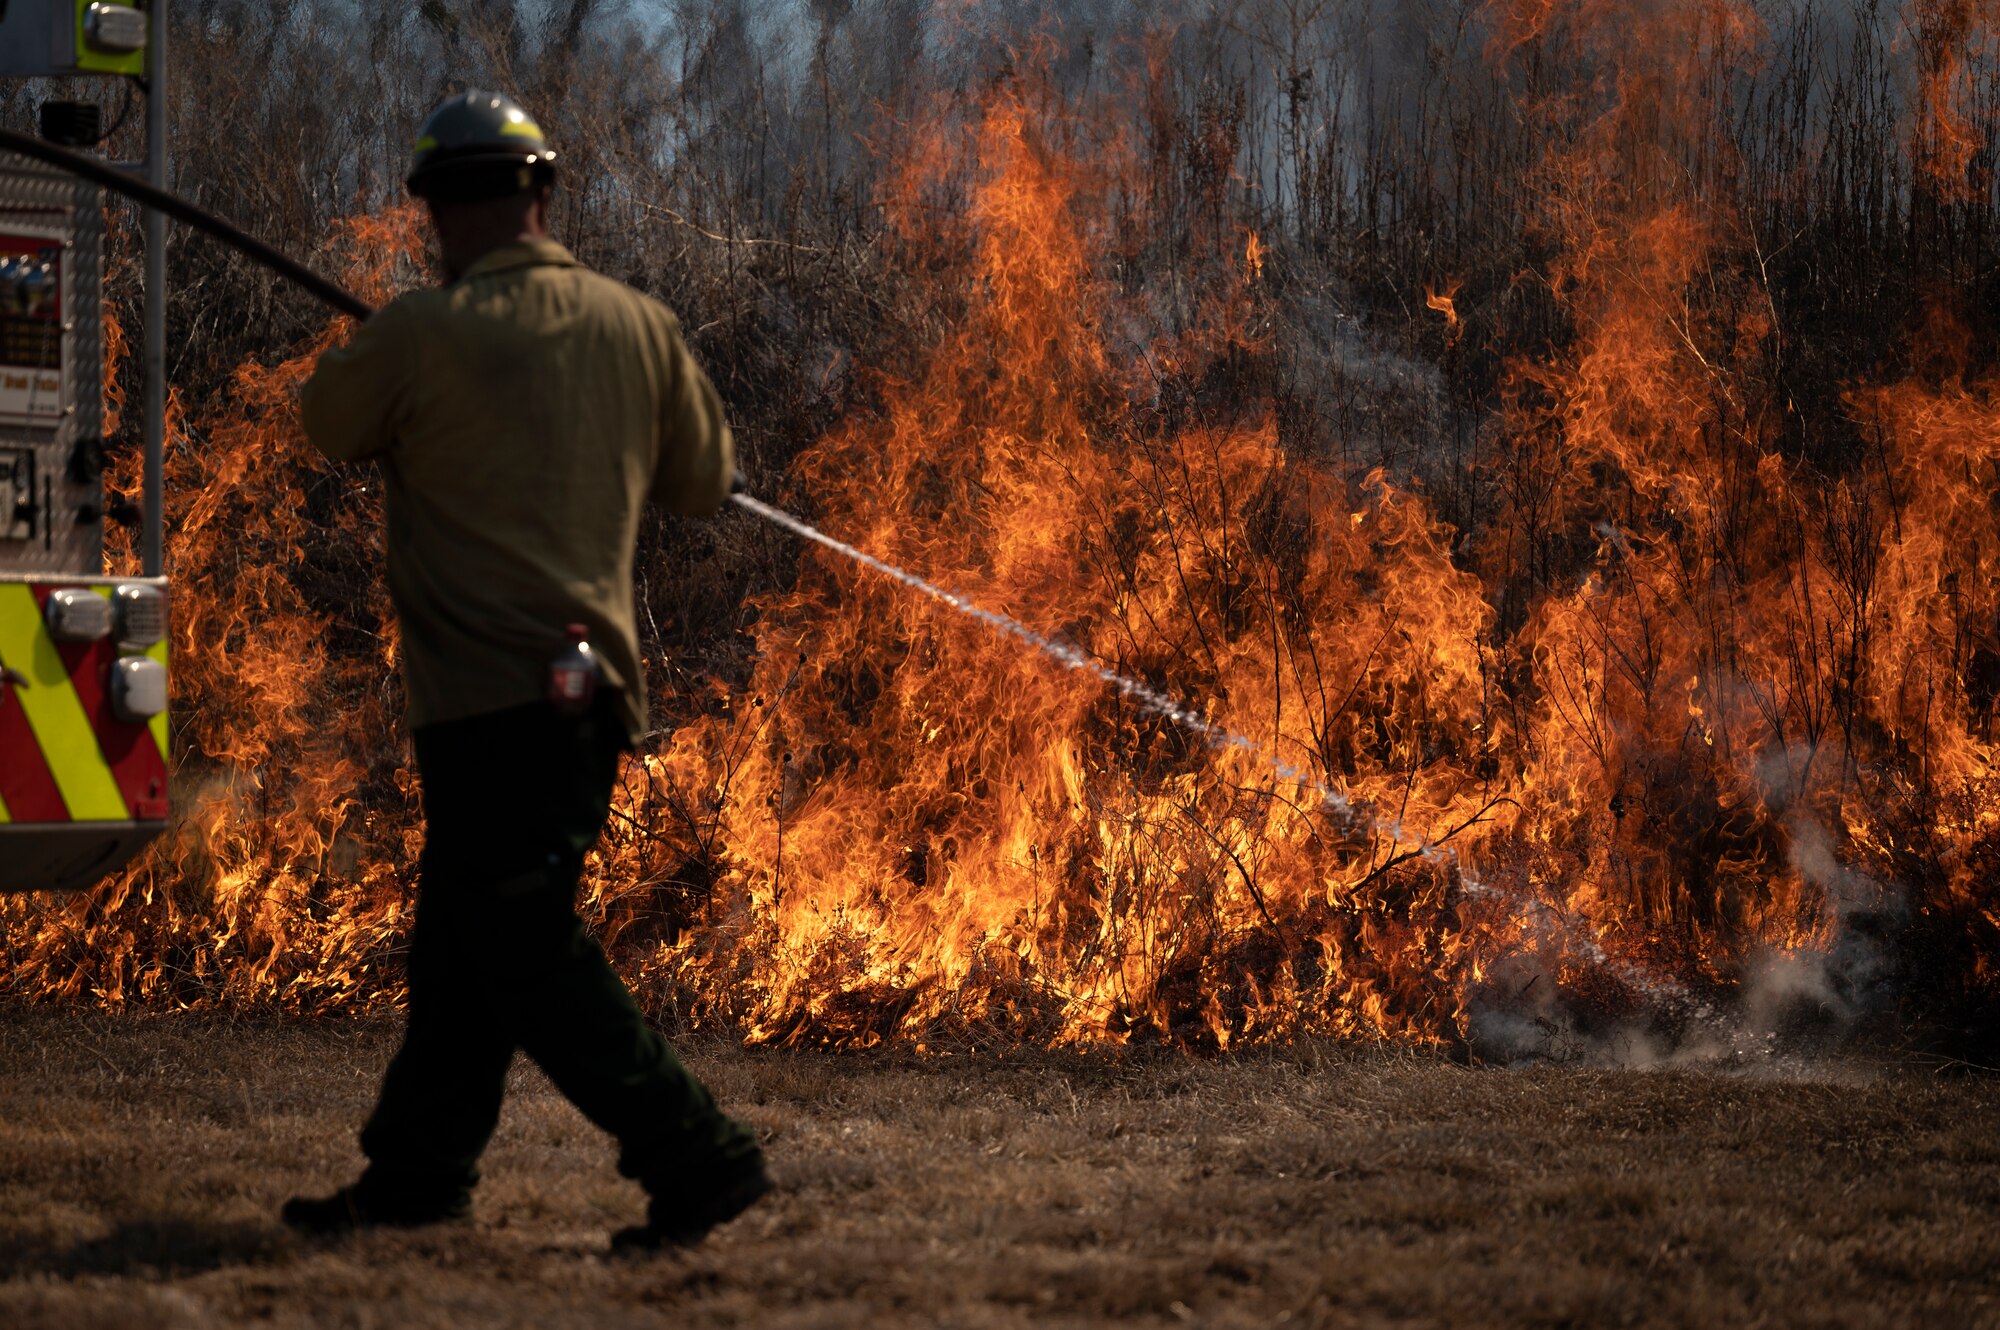 A firefighter puts out a controlled fire with a hose.